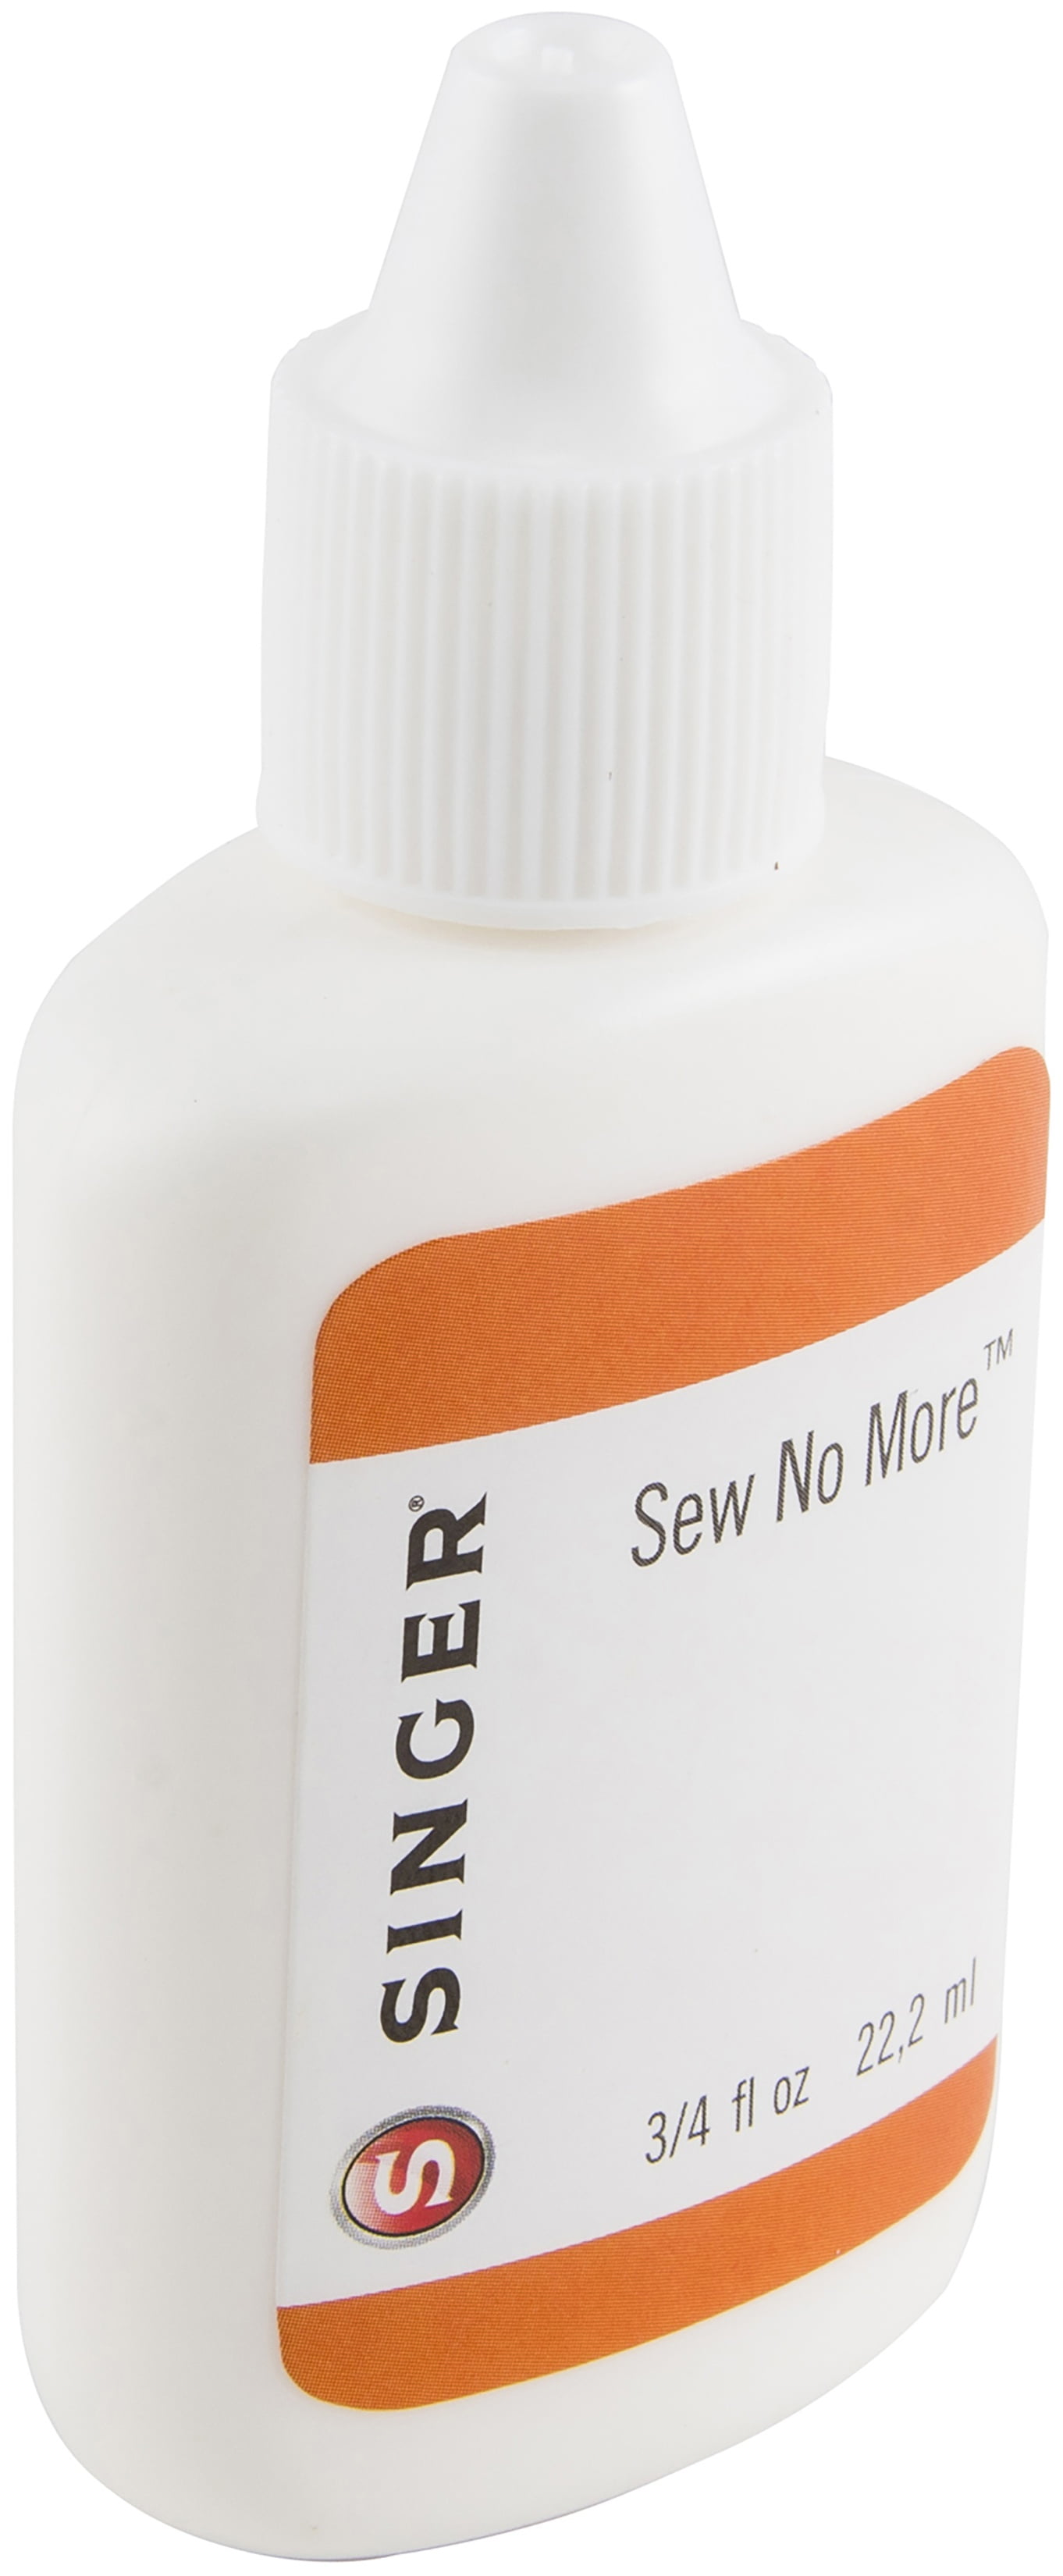 Singer Sew-No-More,Fabric Glue, .75 oz., For Stitchless Sewing